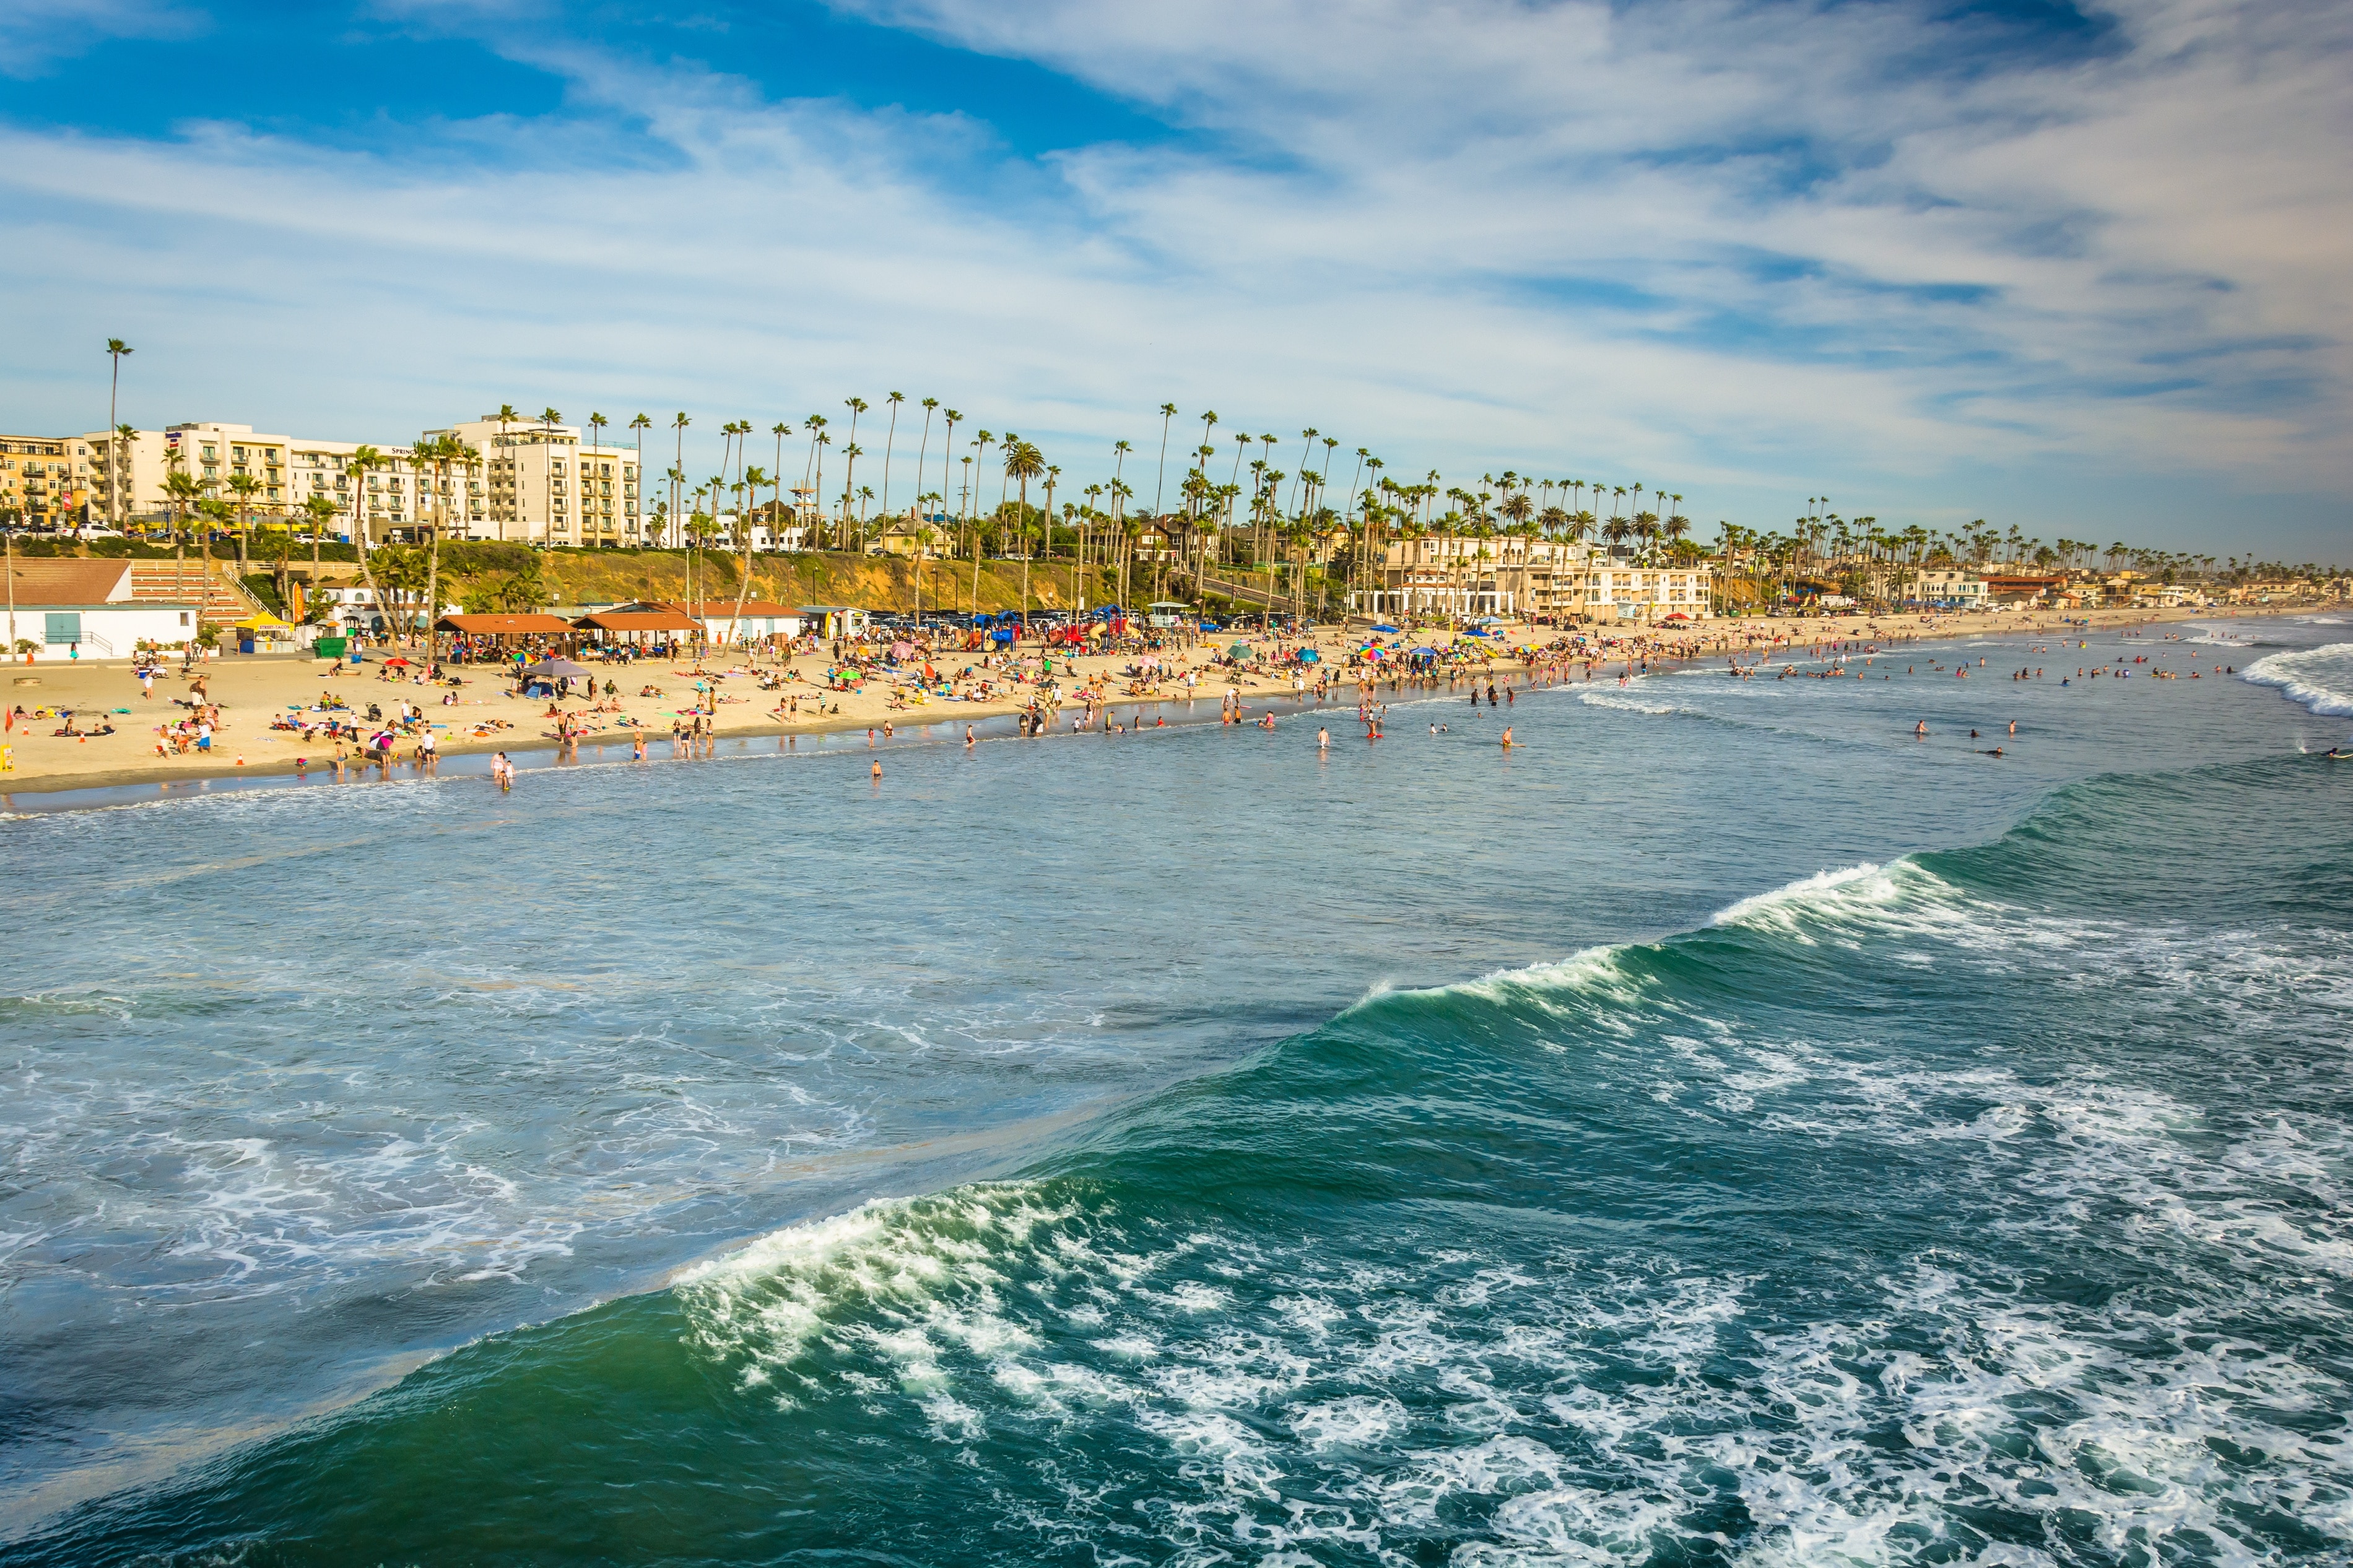 <h2>Top-rated places to stay near the beach in Oceanside</h2>